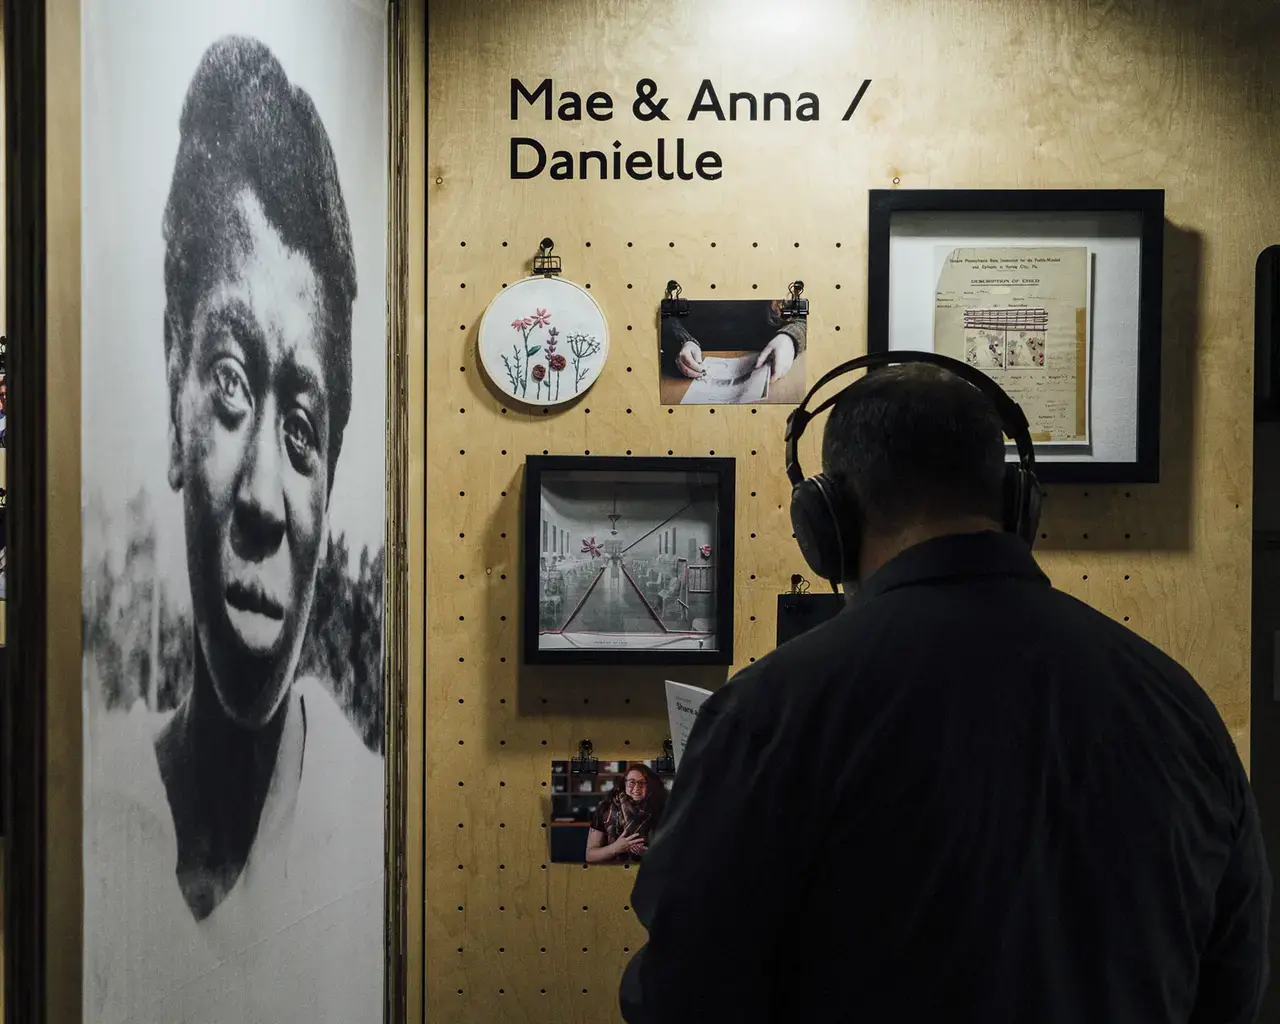 A man wearing headphones stand in front of a wooden display that features framed embroidery, archival imagery and contemporary photos. The words Mae & Anna / Danielle appear on the display. Adjacent to the display is a larger than life-sized archival portrait of a middle-aged Black woman.